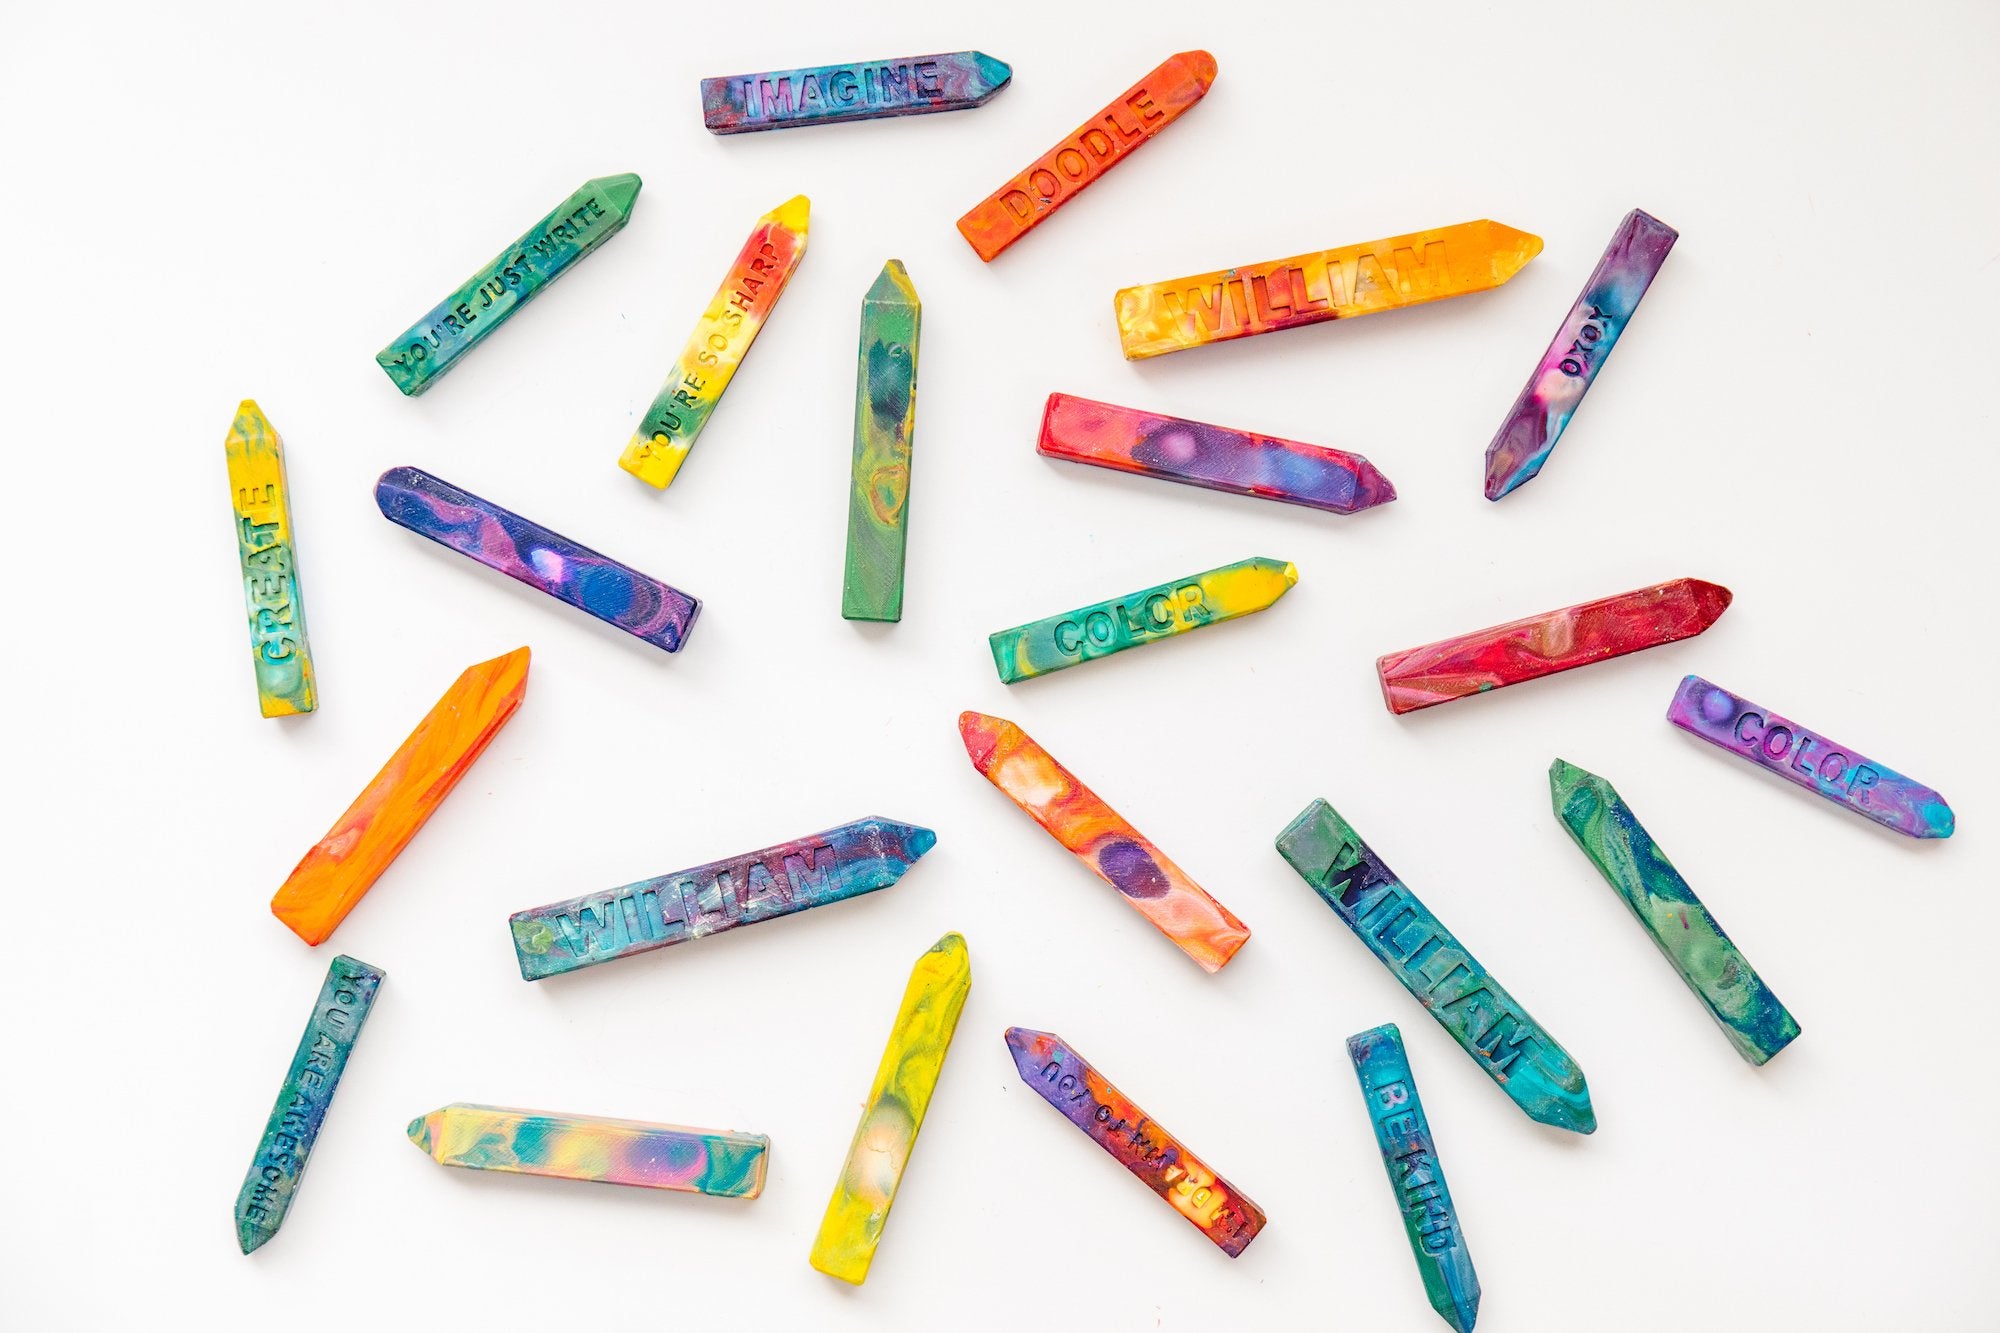 16 Crayon Rocks Color Your Own Gift Wrap – More Than Words